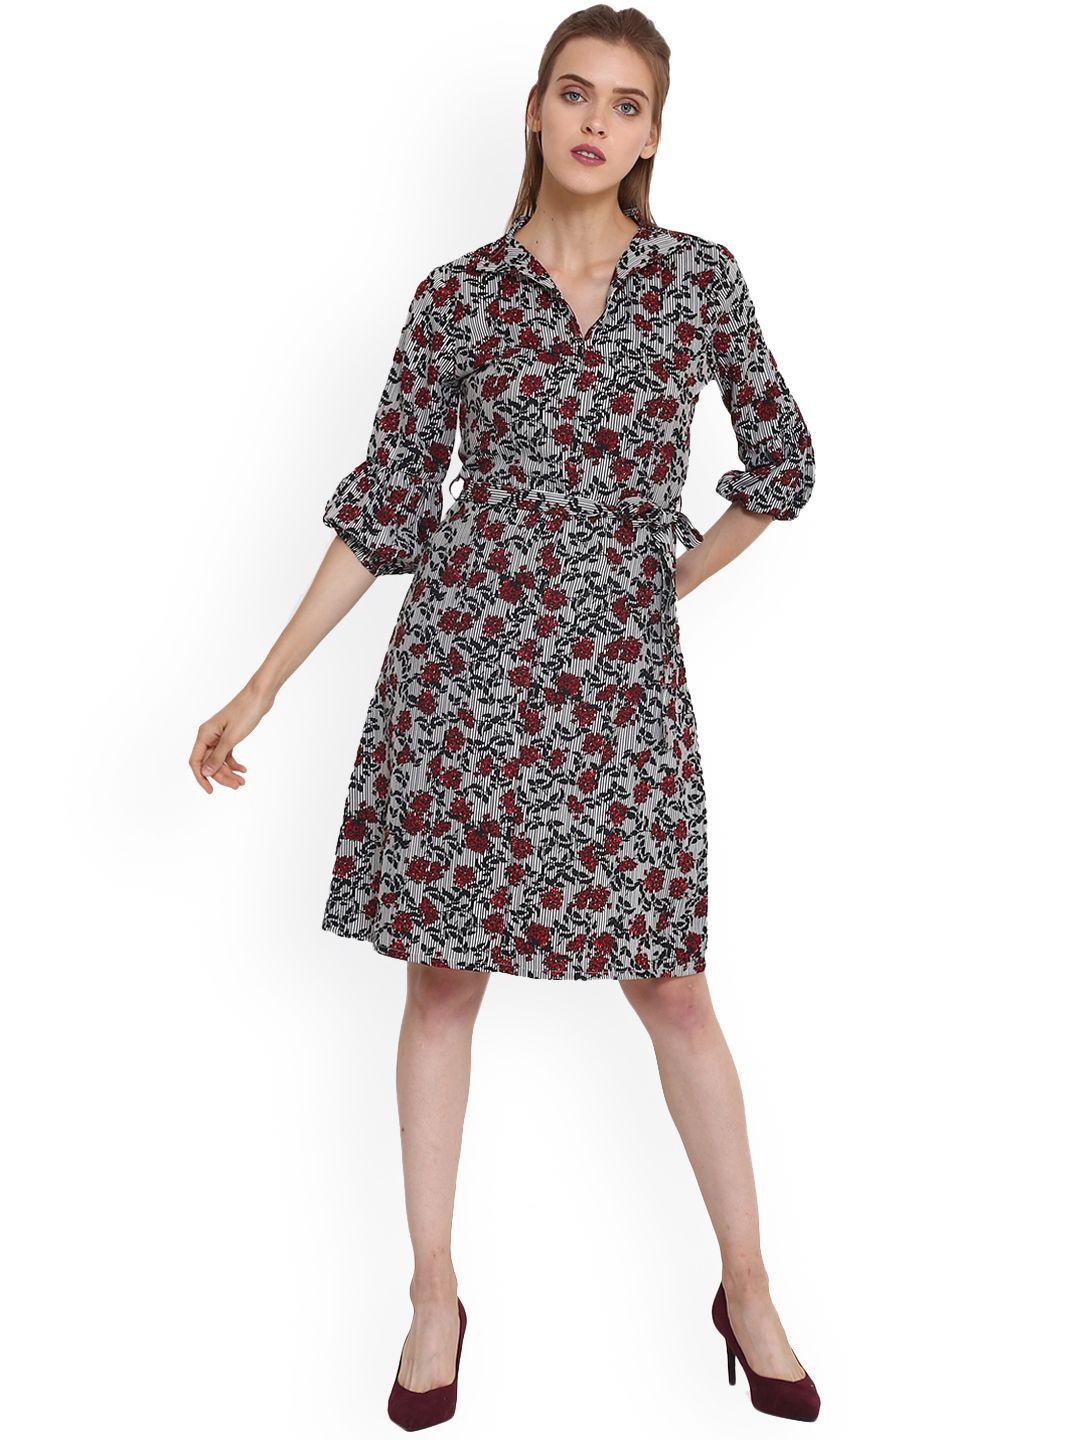 purys-women-grey-printed-fit-and-flare-dress